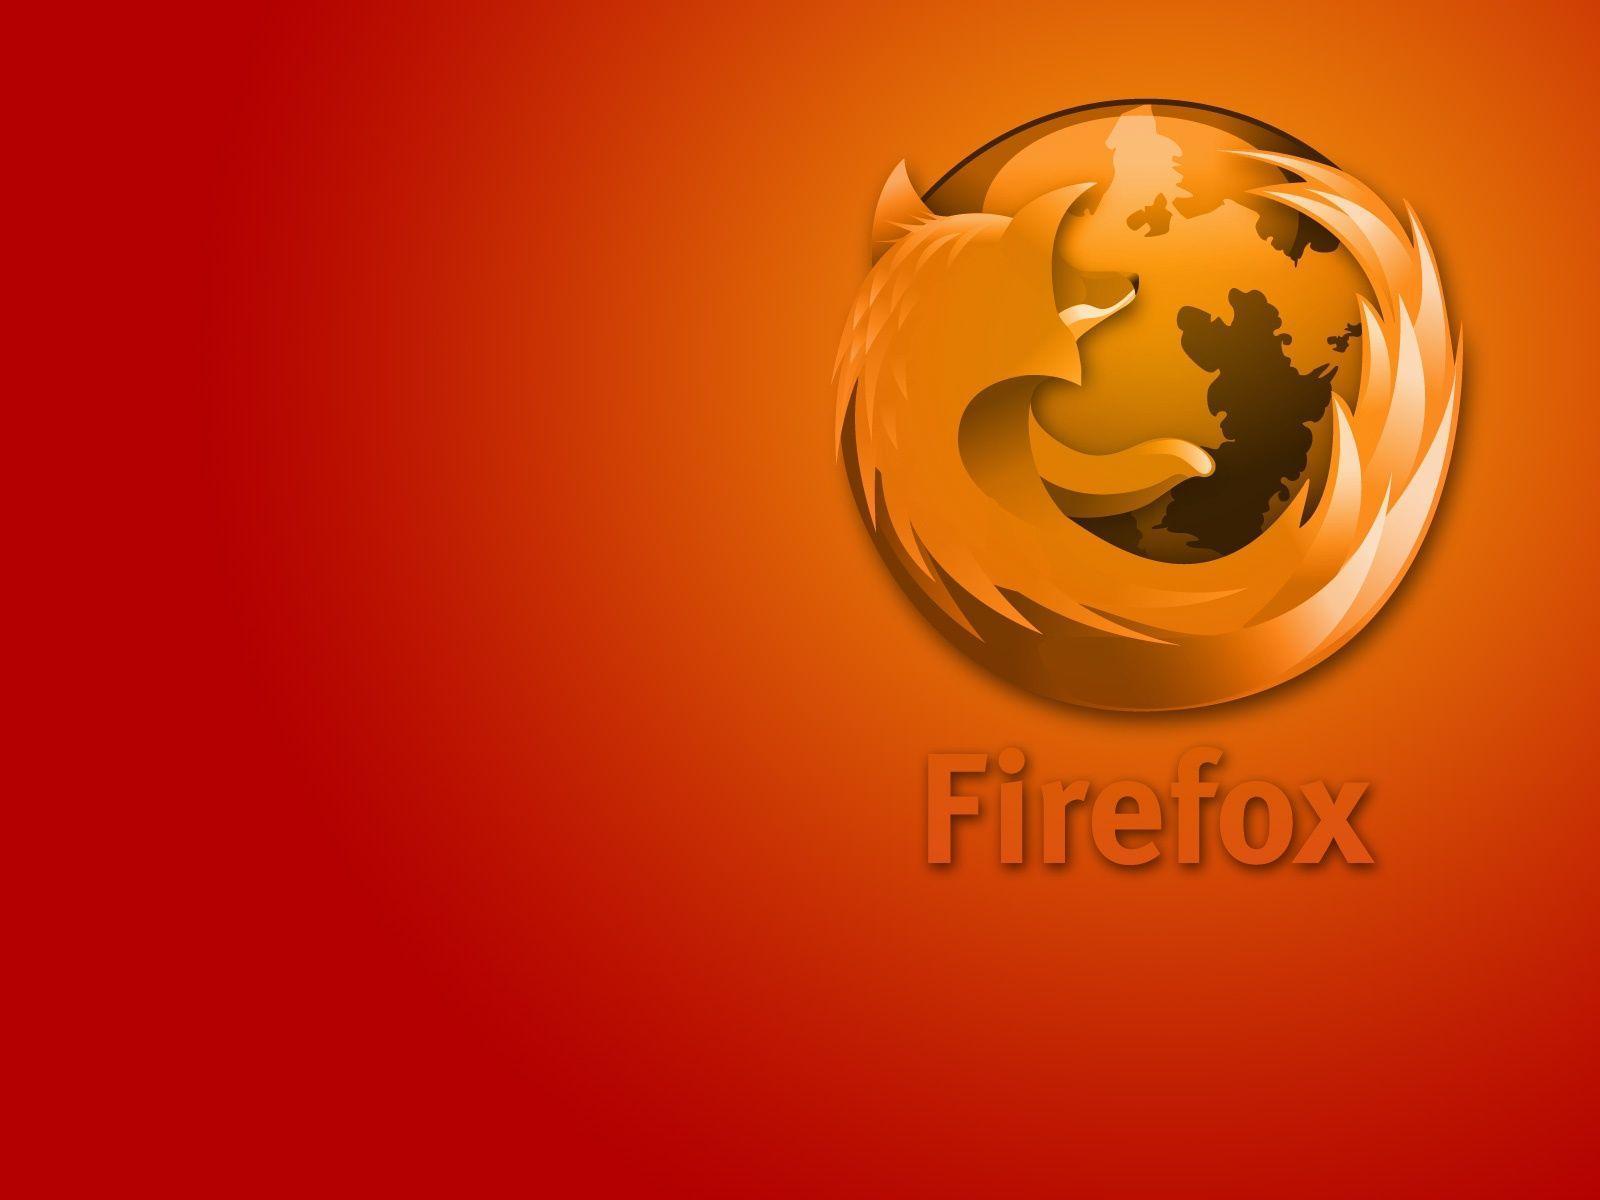 Free Download Mozilla Firefox Browser and Wallpaper